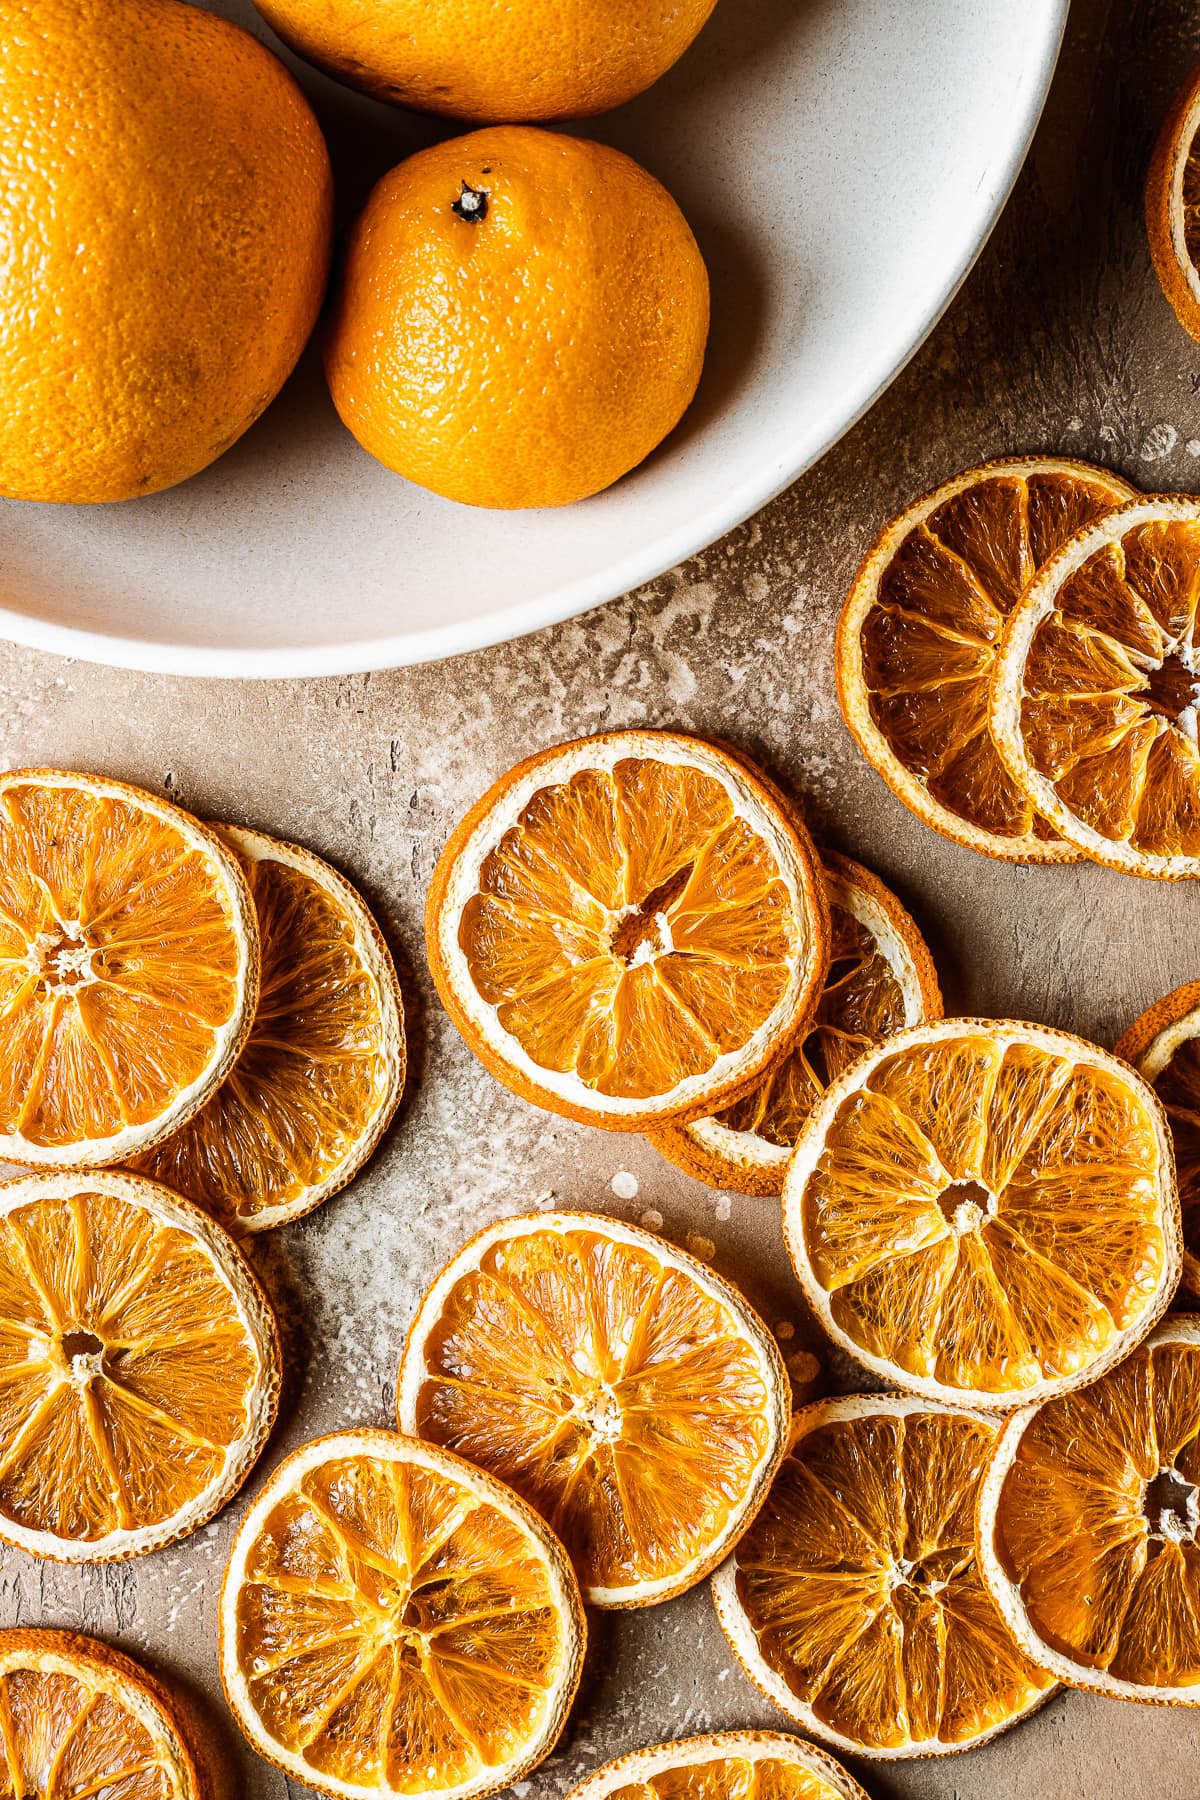 Dried orange slices on a warm tan background with a white bowl of oranges of different sizes at top left.